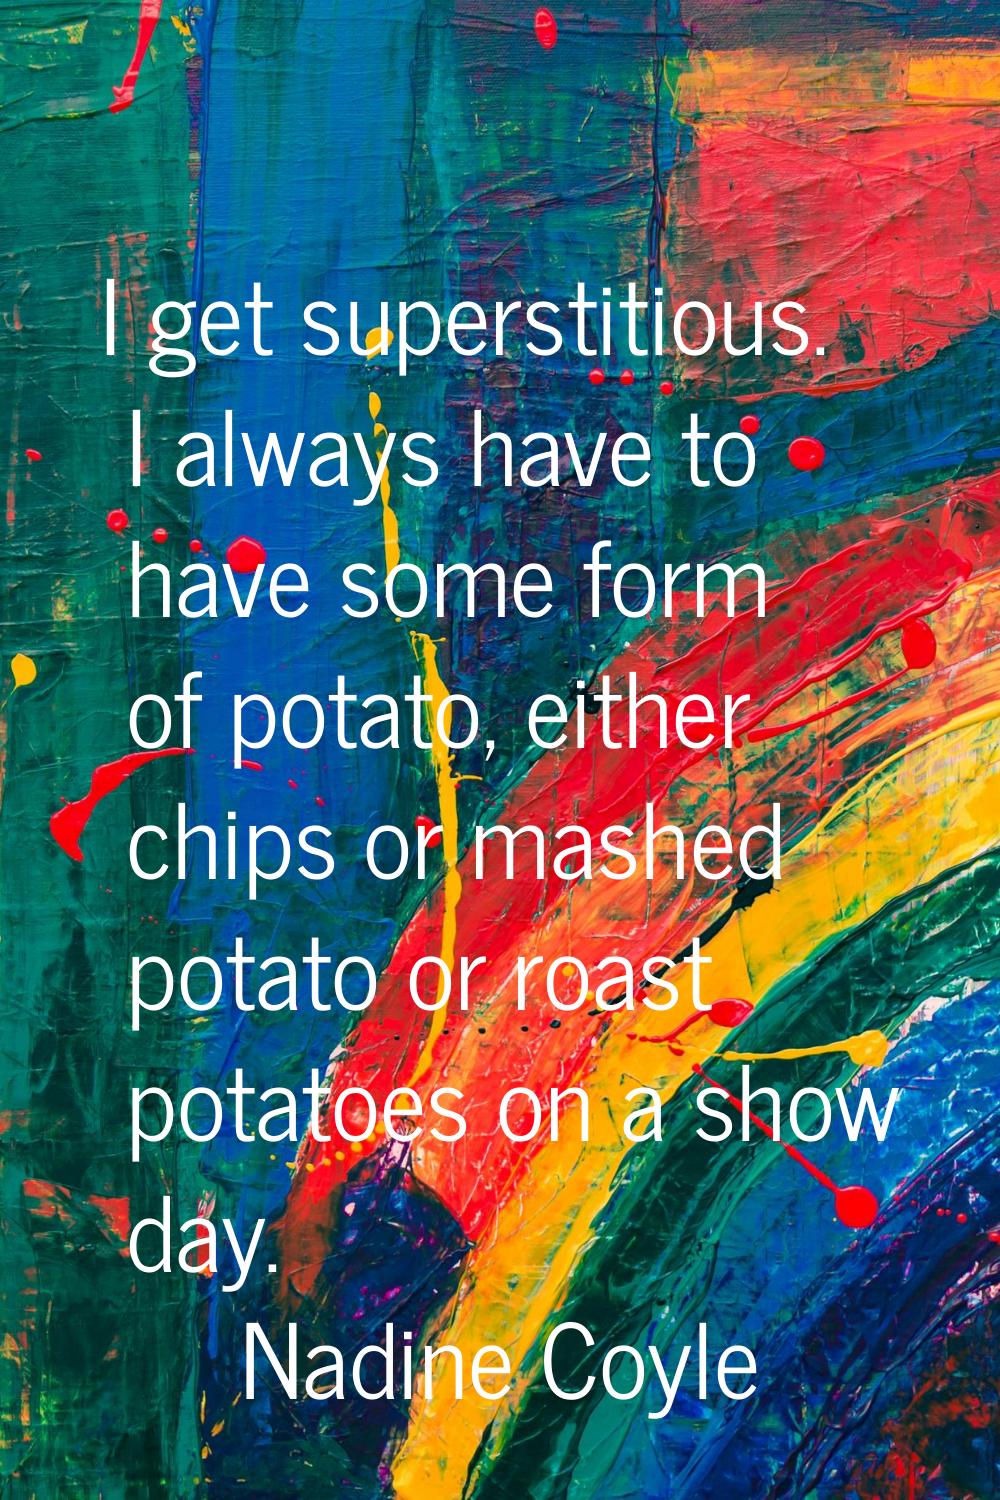 I get superstitious. I always have to have some form of potato, either chips or mashed potato or ro